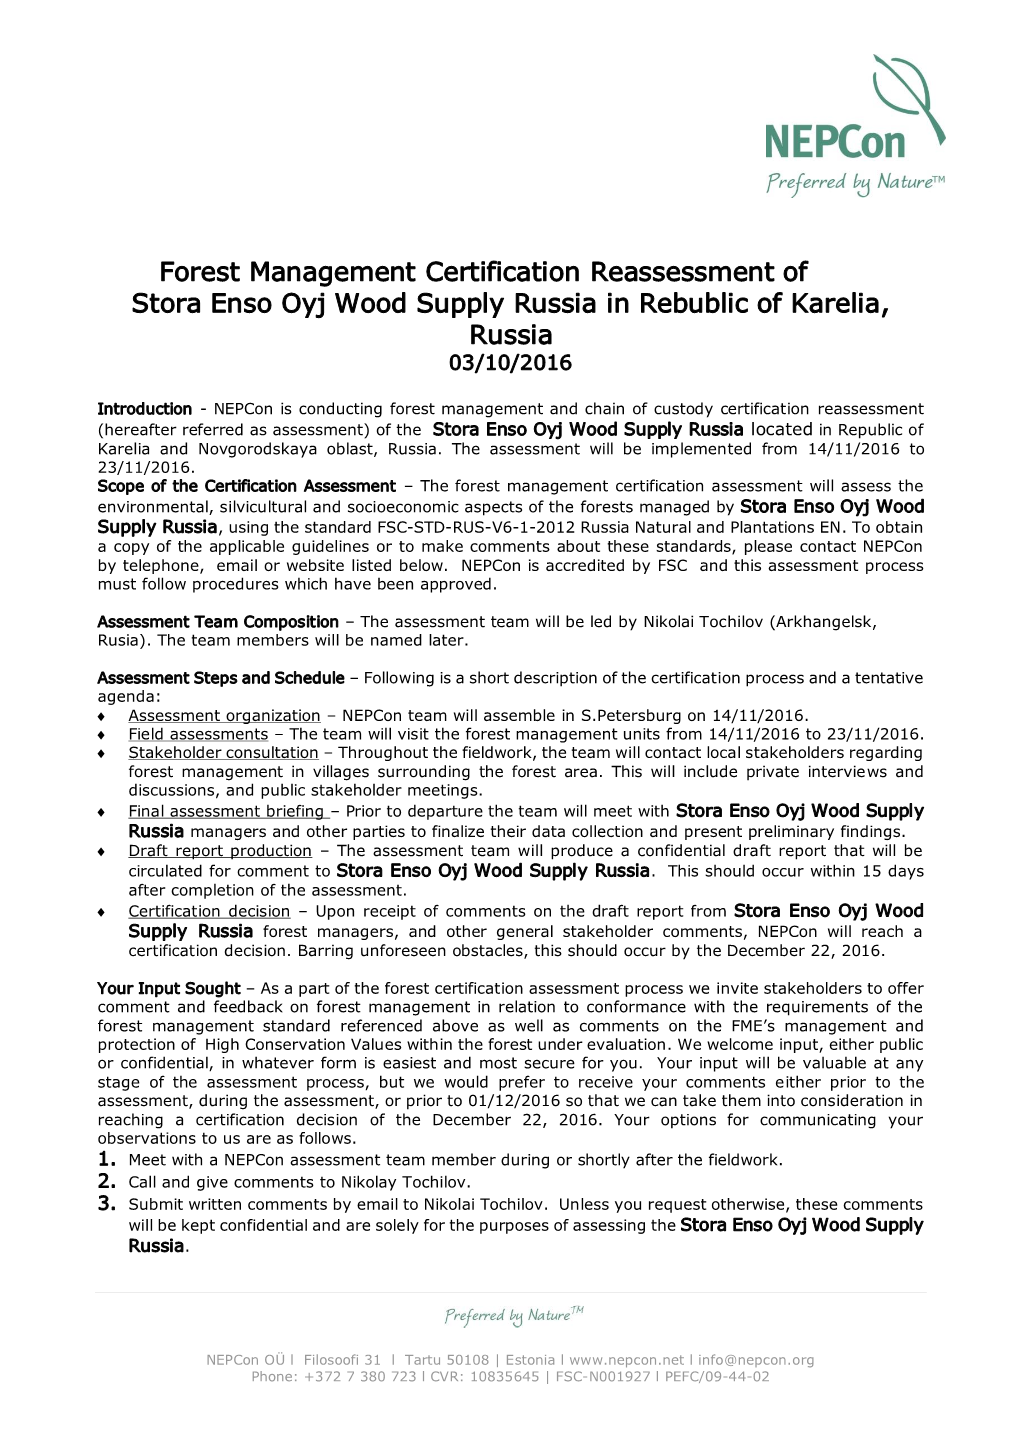 Forest Management Certification Reassessment of Stora Enso Oyj Wood Supply Russia in Rebublic of Karelia, Russia 03/10/2016